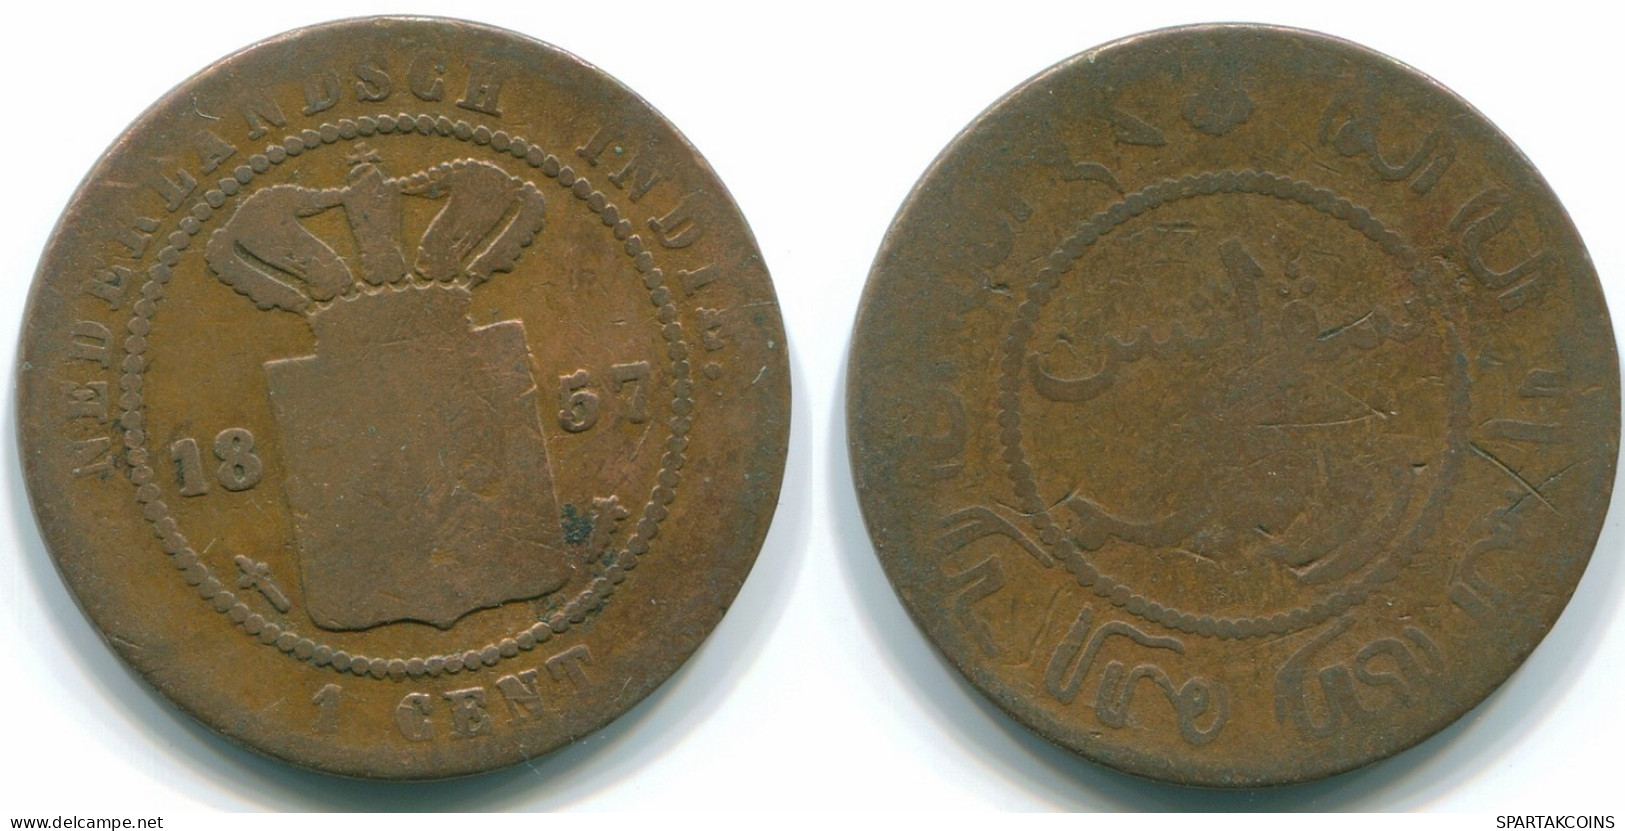 1 CENT 1857 NETHERLANDS EAST INDIES INDONESIA Copper Colonial Coin #S10037.U.A - Indes Neerlandesas